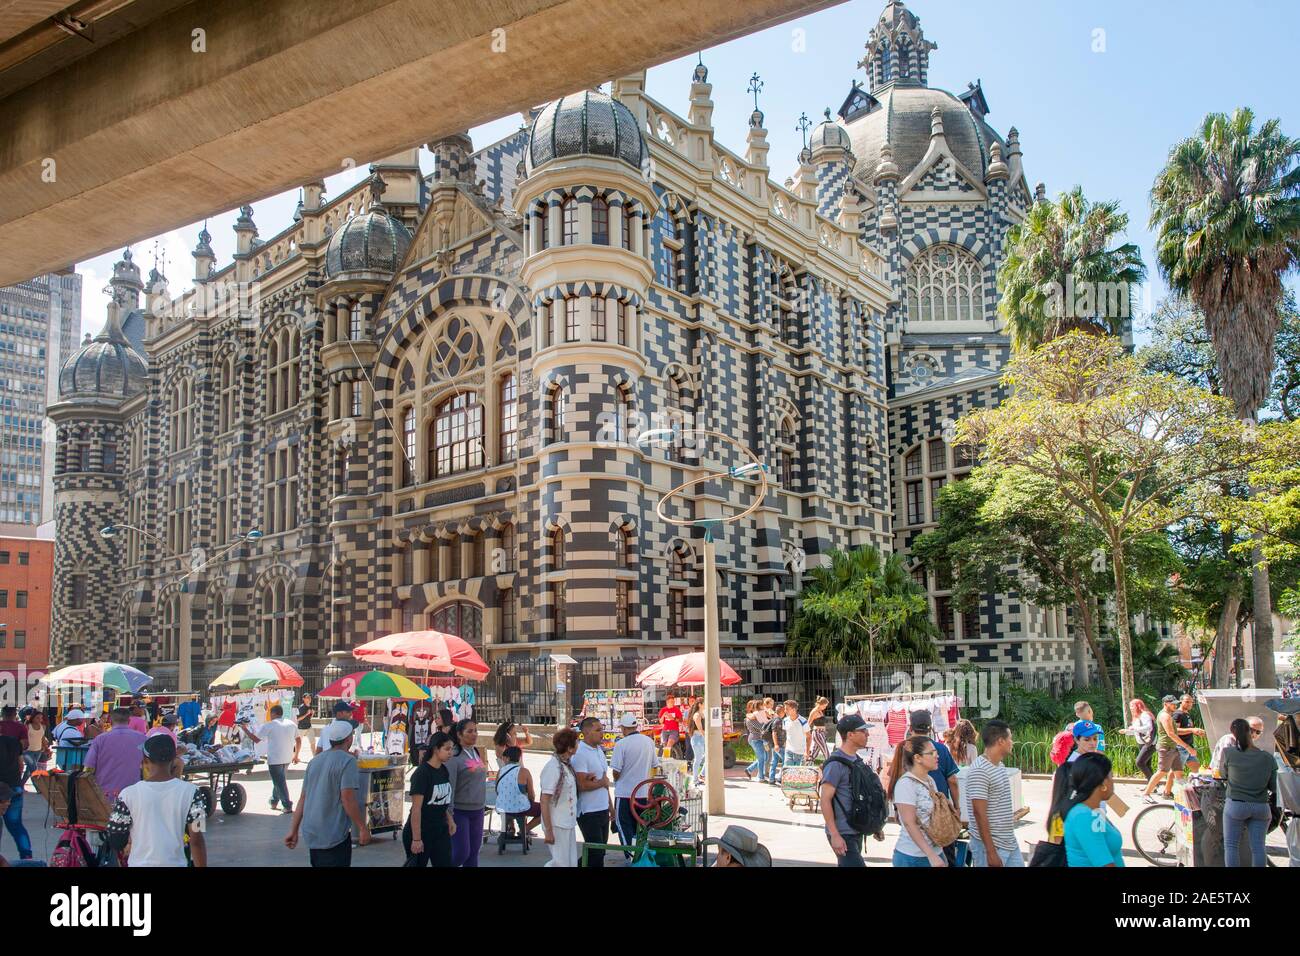 The Rafael Uribe Uribe Palace of Culture and street vendors in downtown Medellin, Colombia.Medellin, Colombia. Stock Photo